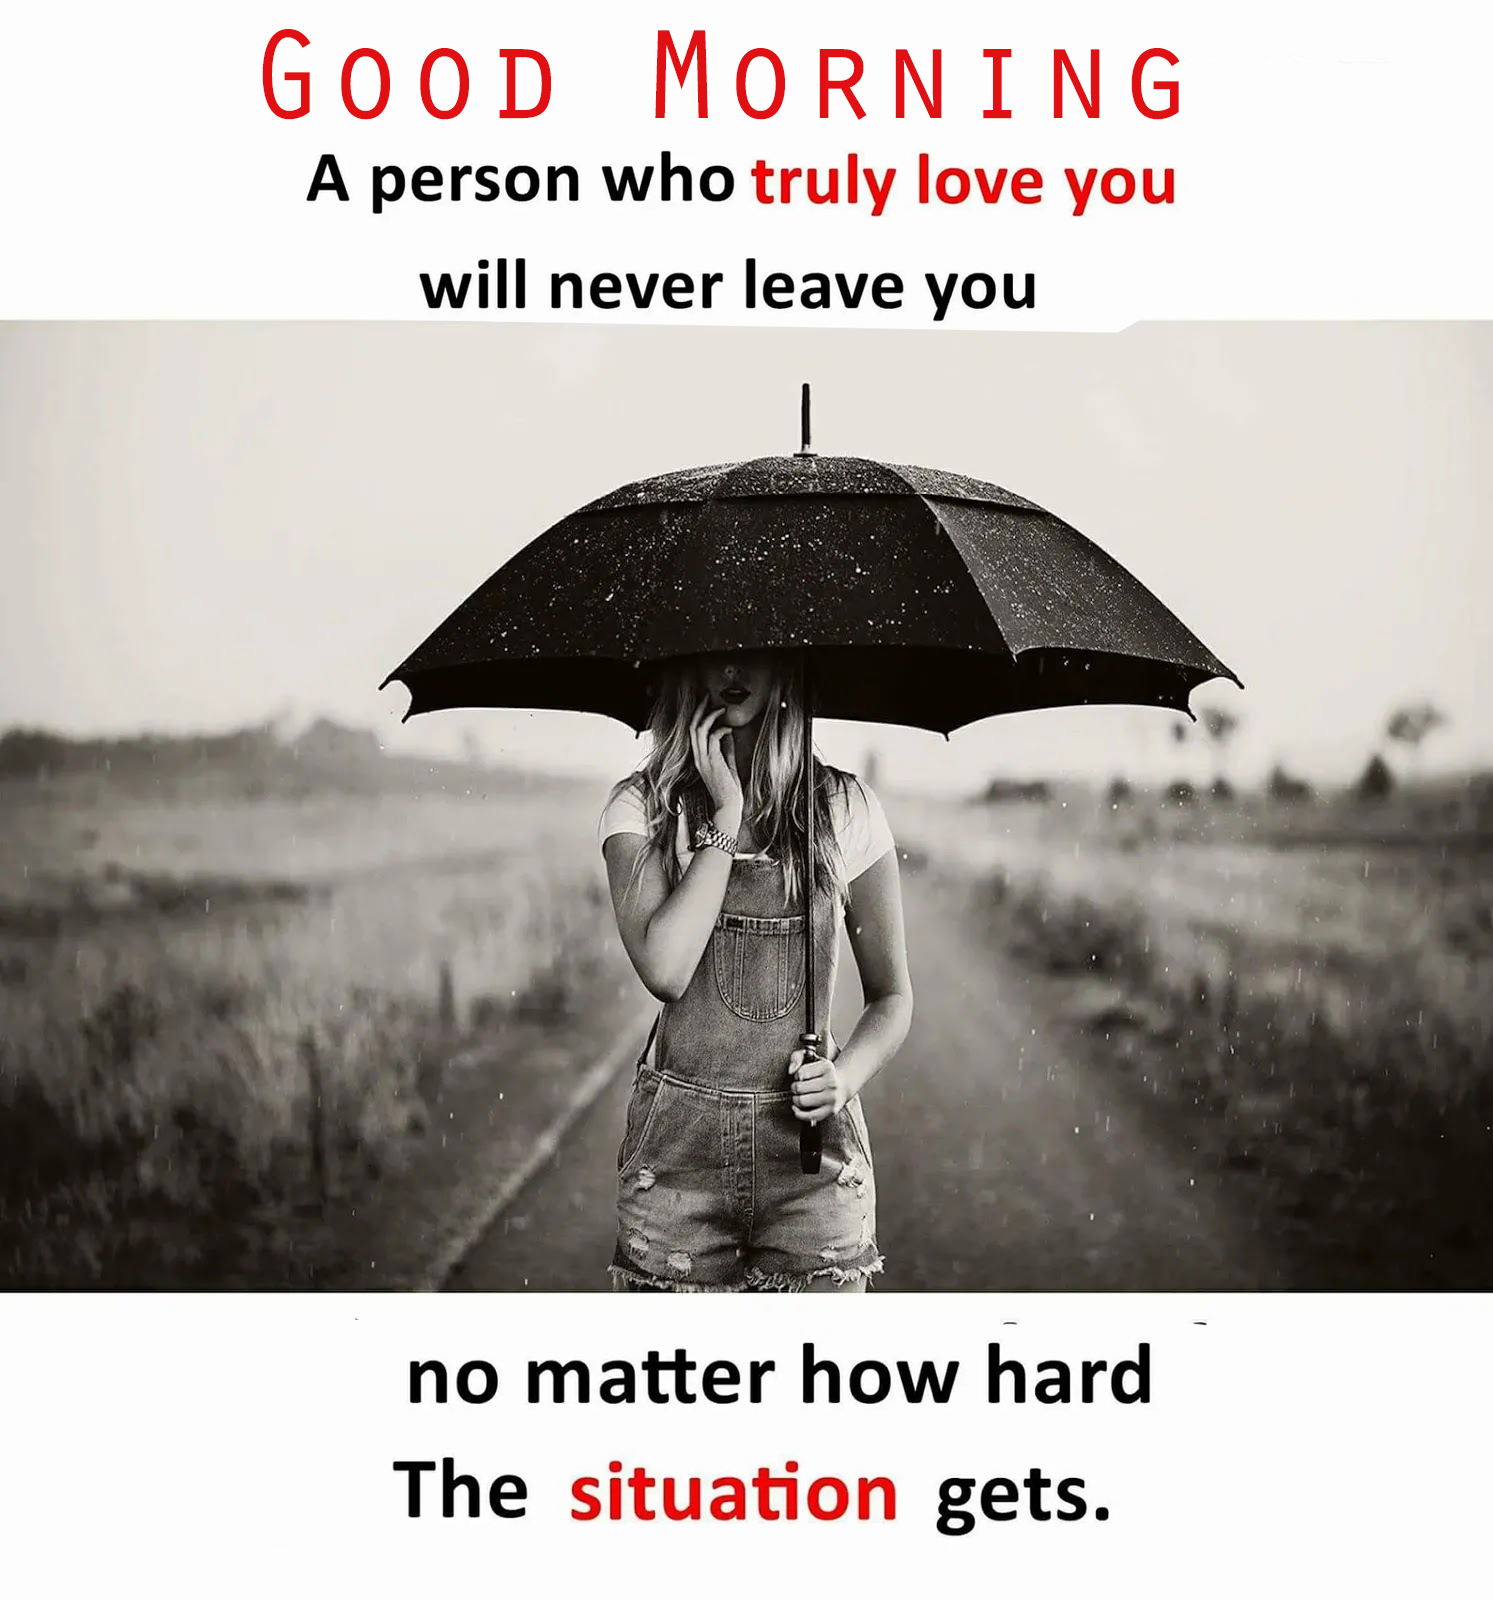 Good Morning Love Images Download - Alone Images Hd Girl - HD Wallpaper 